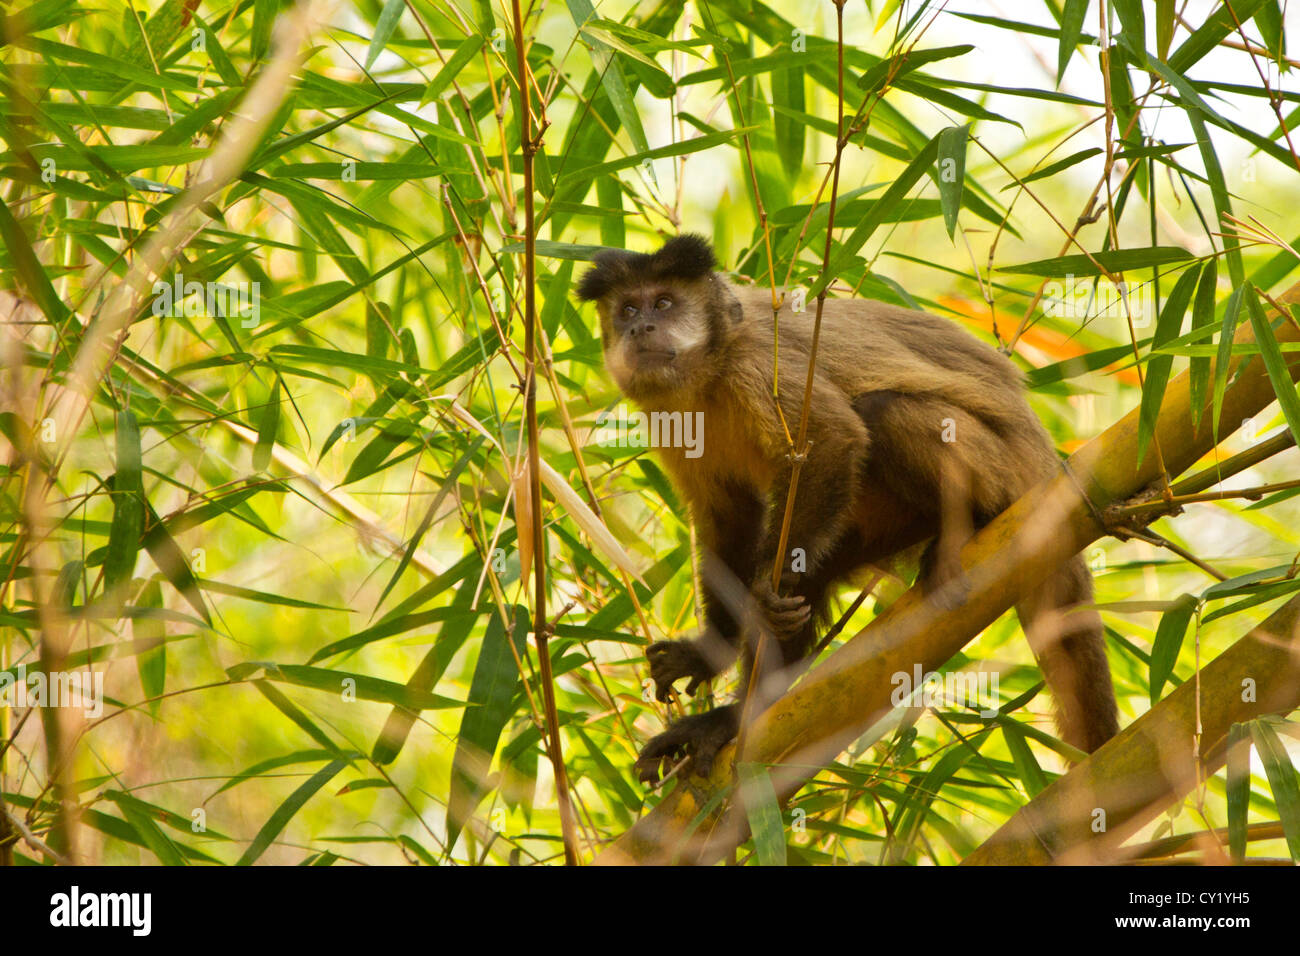 Tufted capuchin (Cebus apella), also known as brown capuchin or black-capped capuchin. Stock Photo